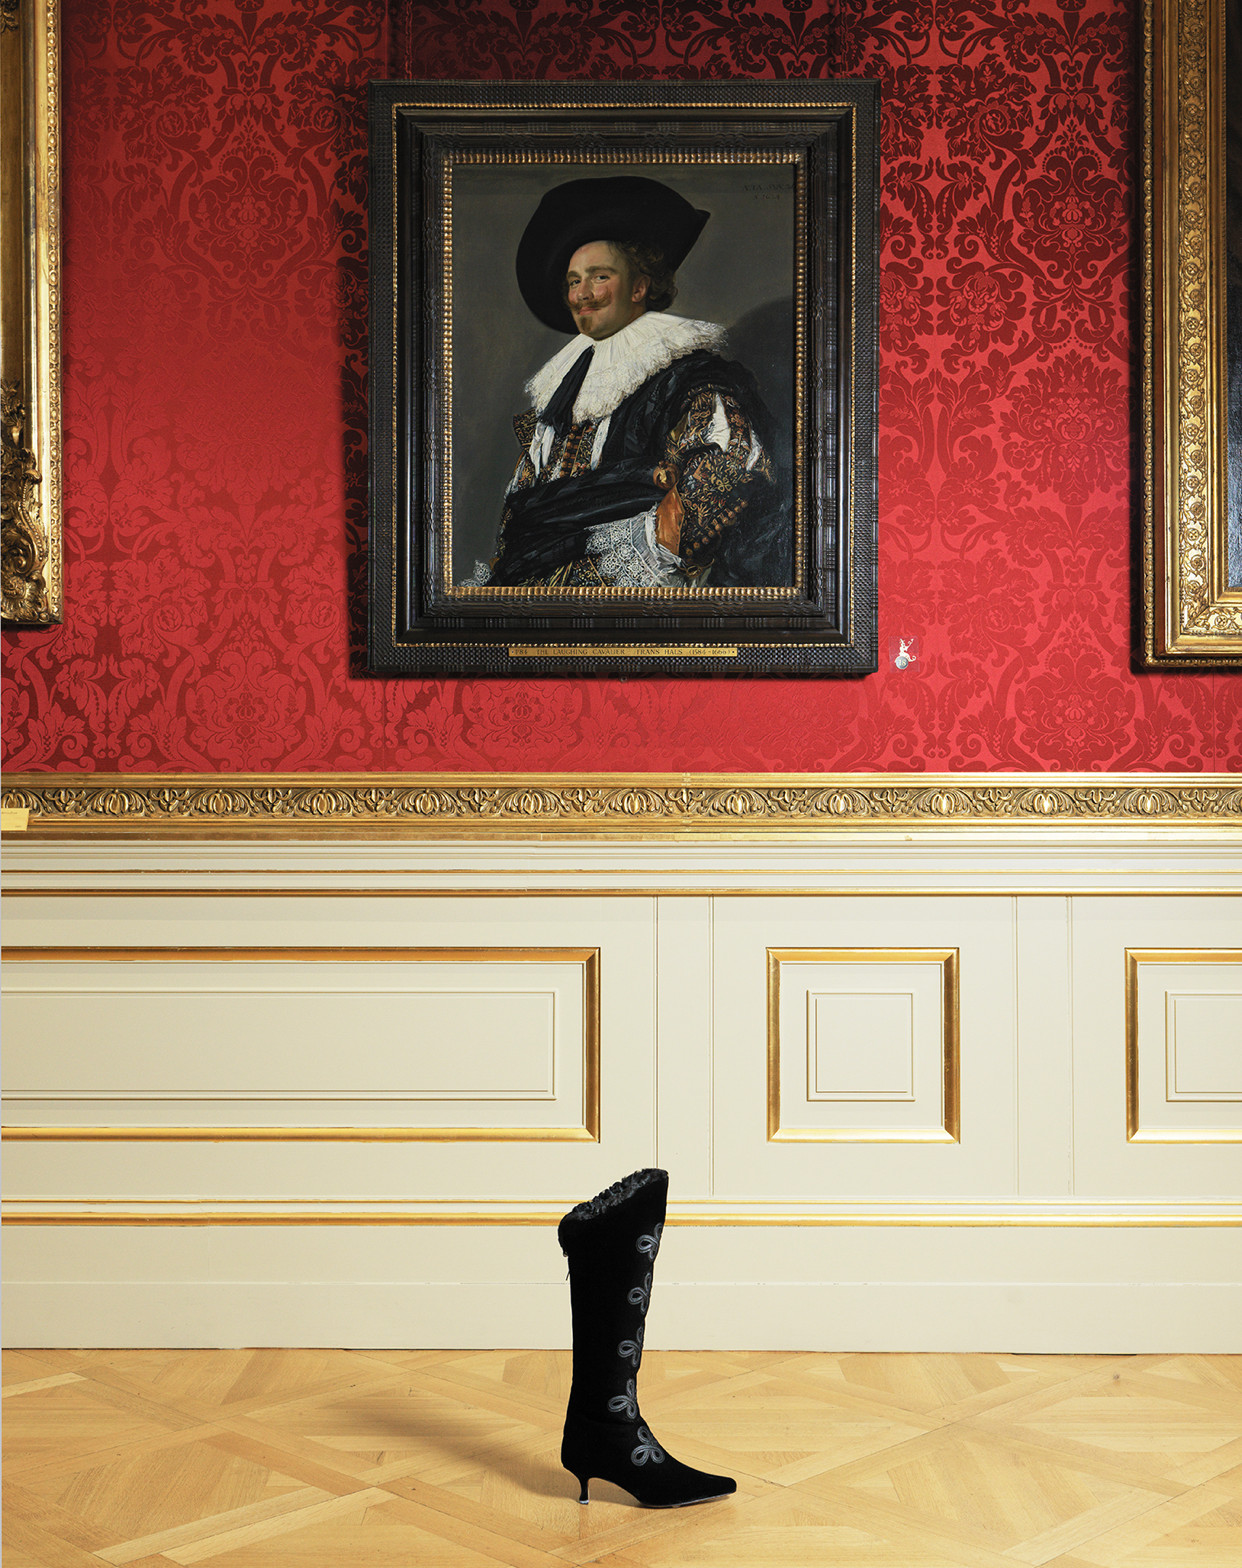 The Asha boot. A black knee high boot with ribbons, is positioned in front of The Laughing Cavalier painting by Frans Hals. 